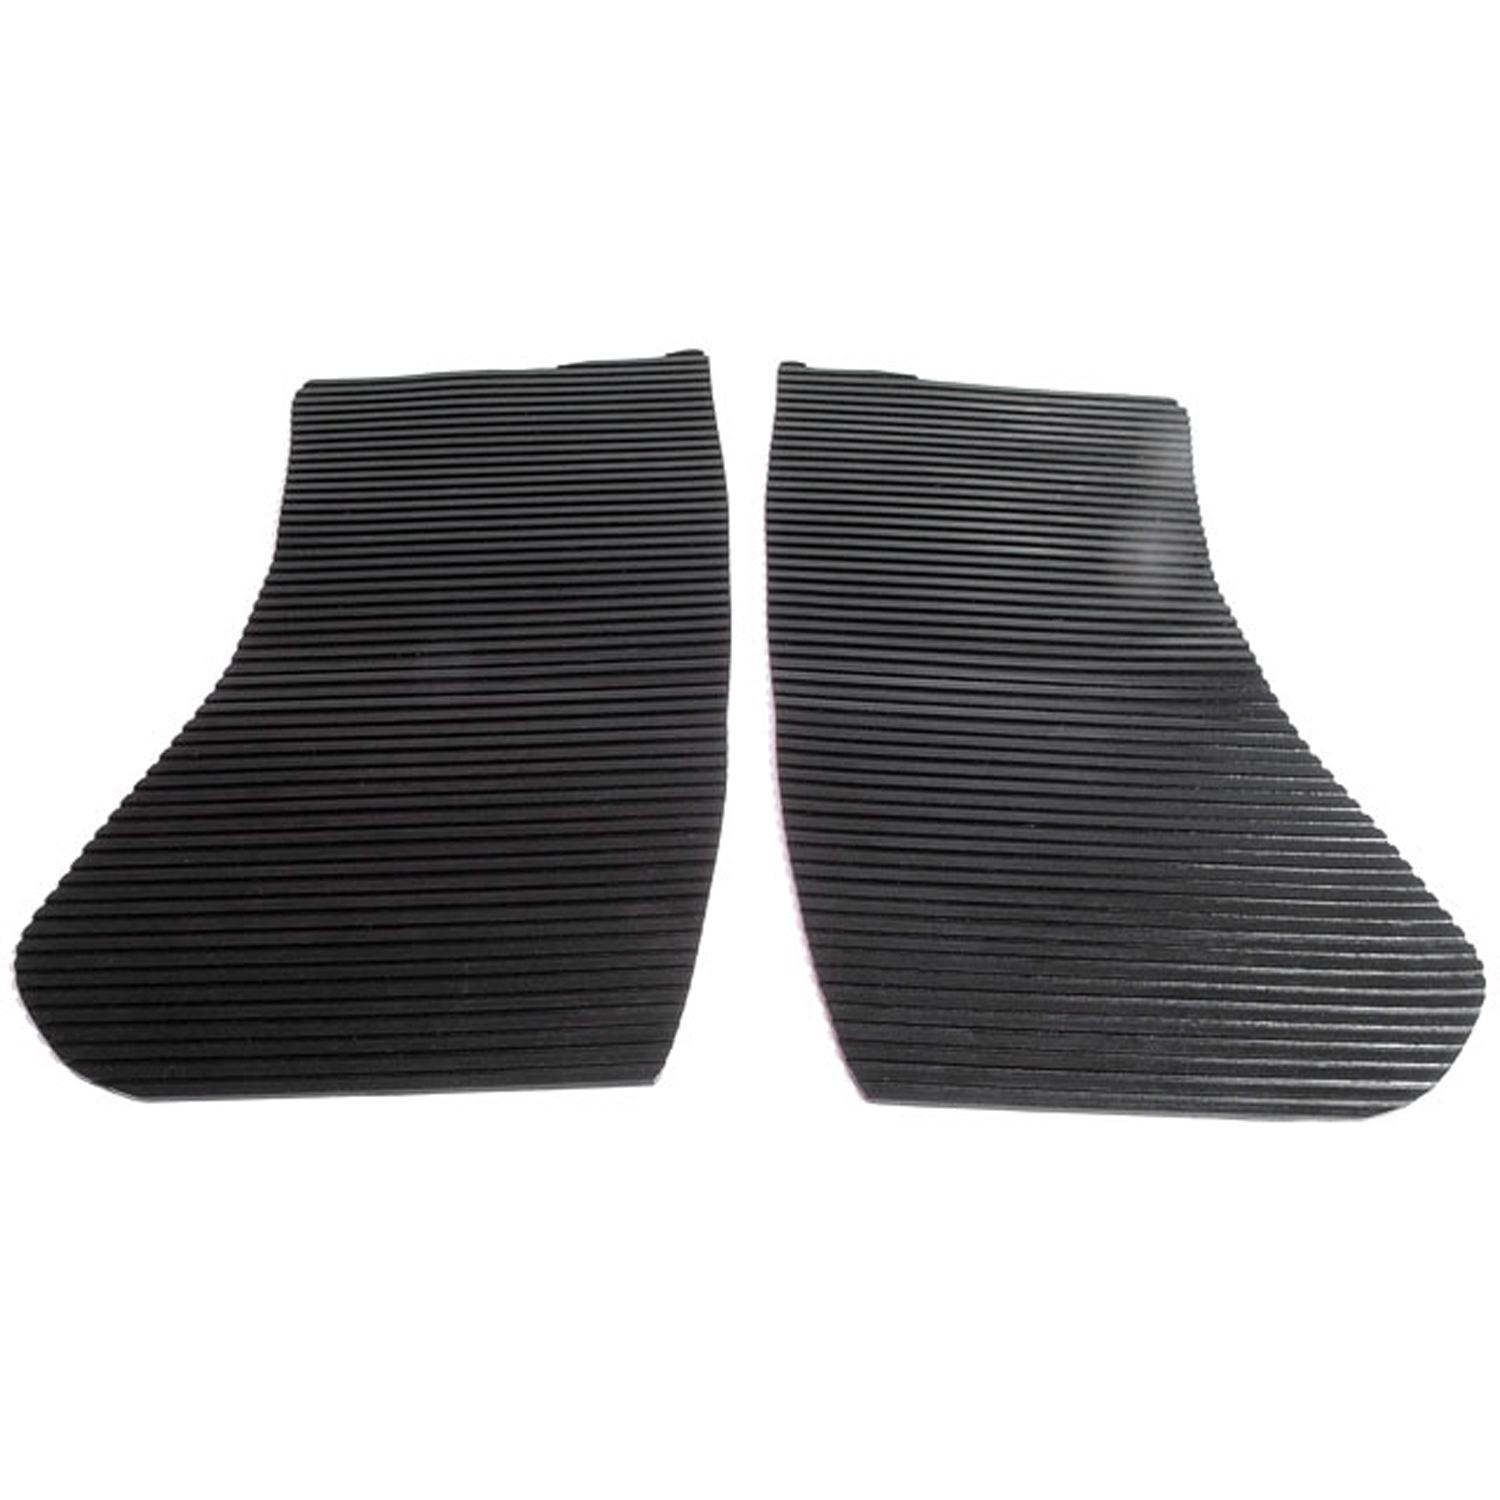 1941 Buick Century Series 60 Gravel Shields.  Molded flat without metal backing plates-FS 35